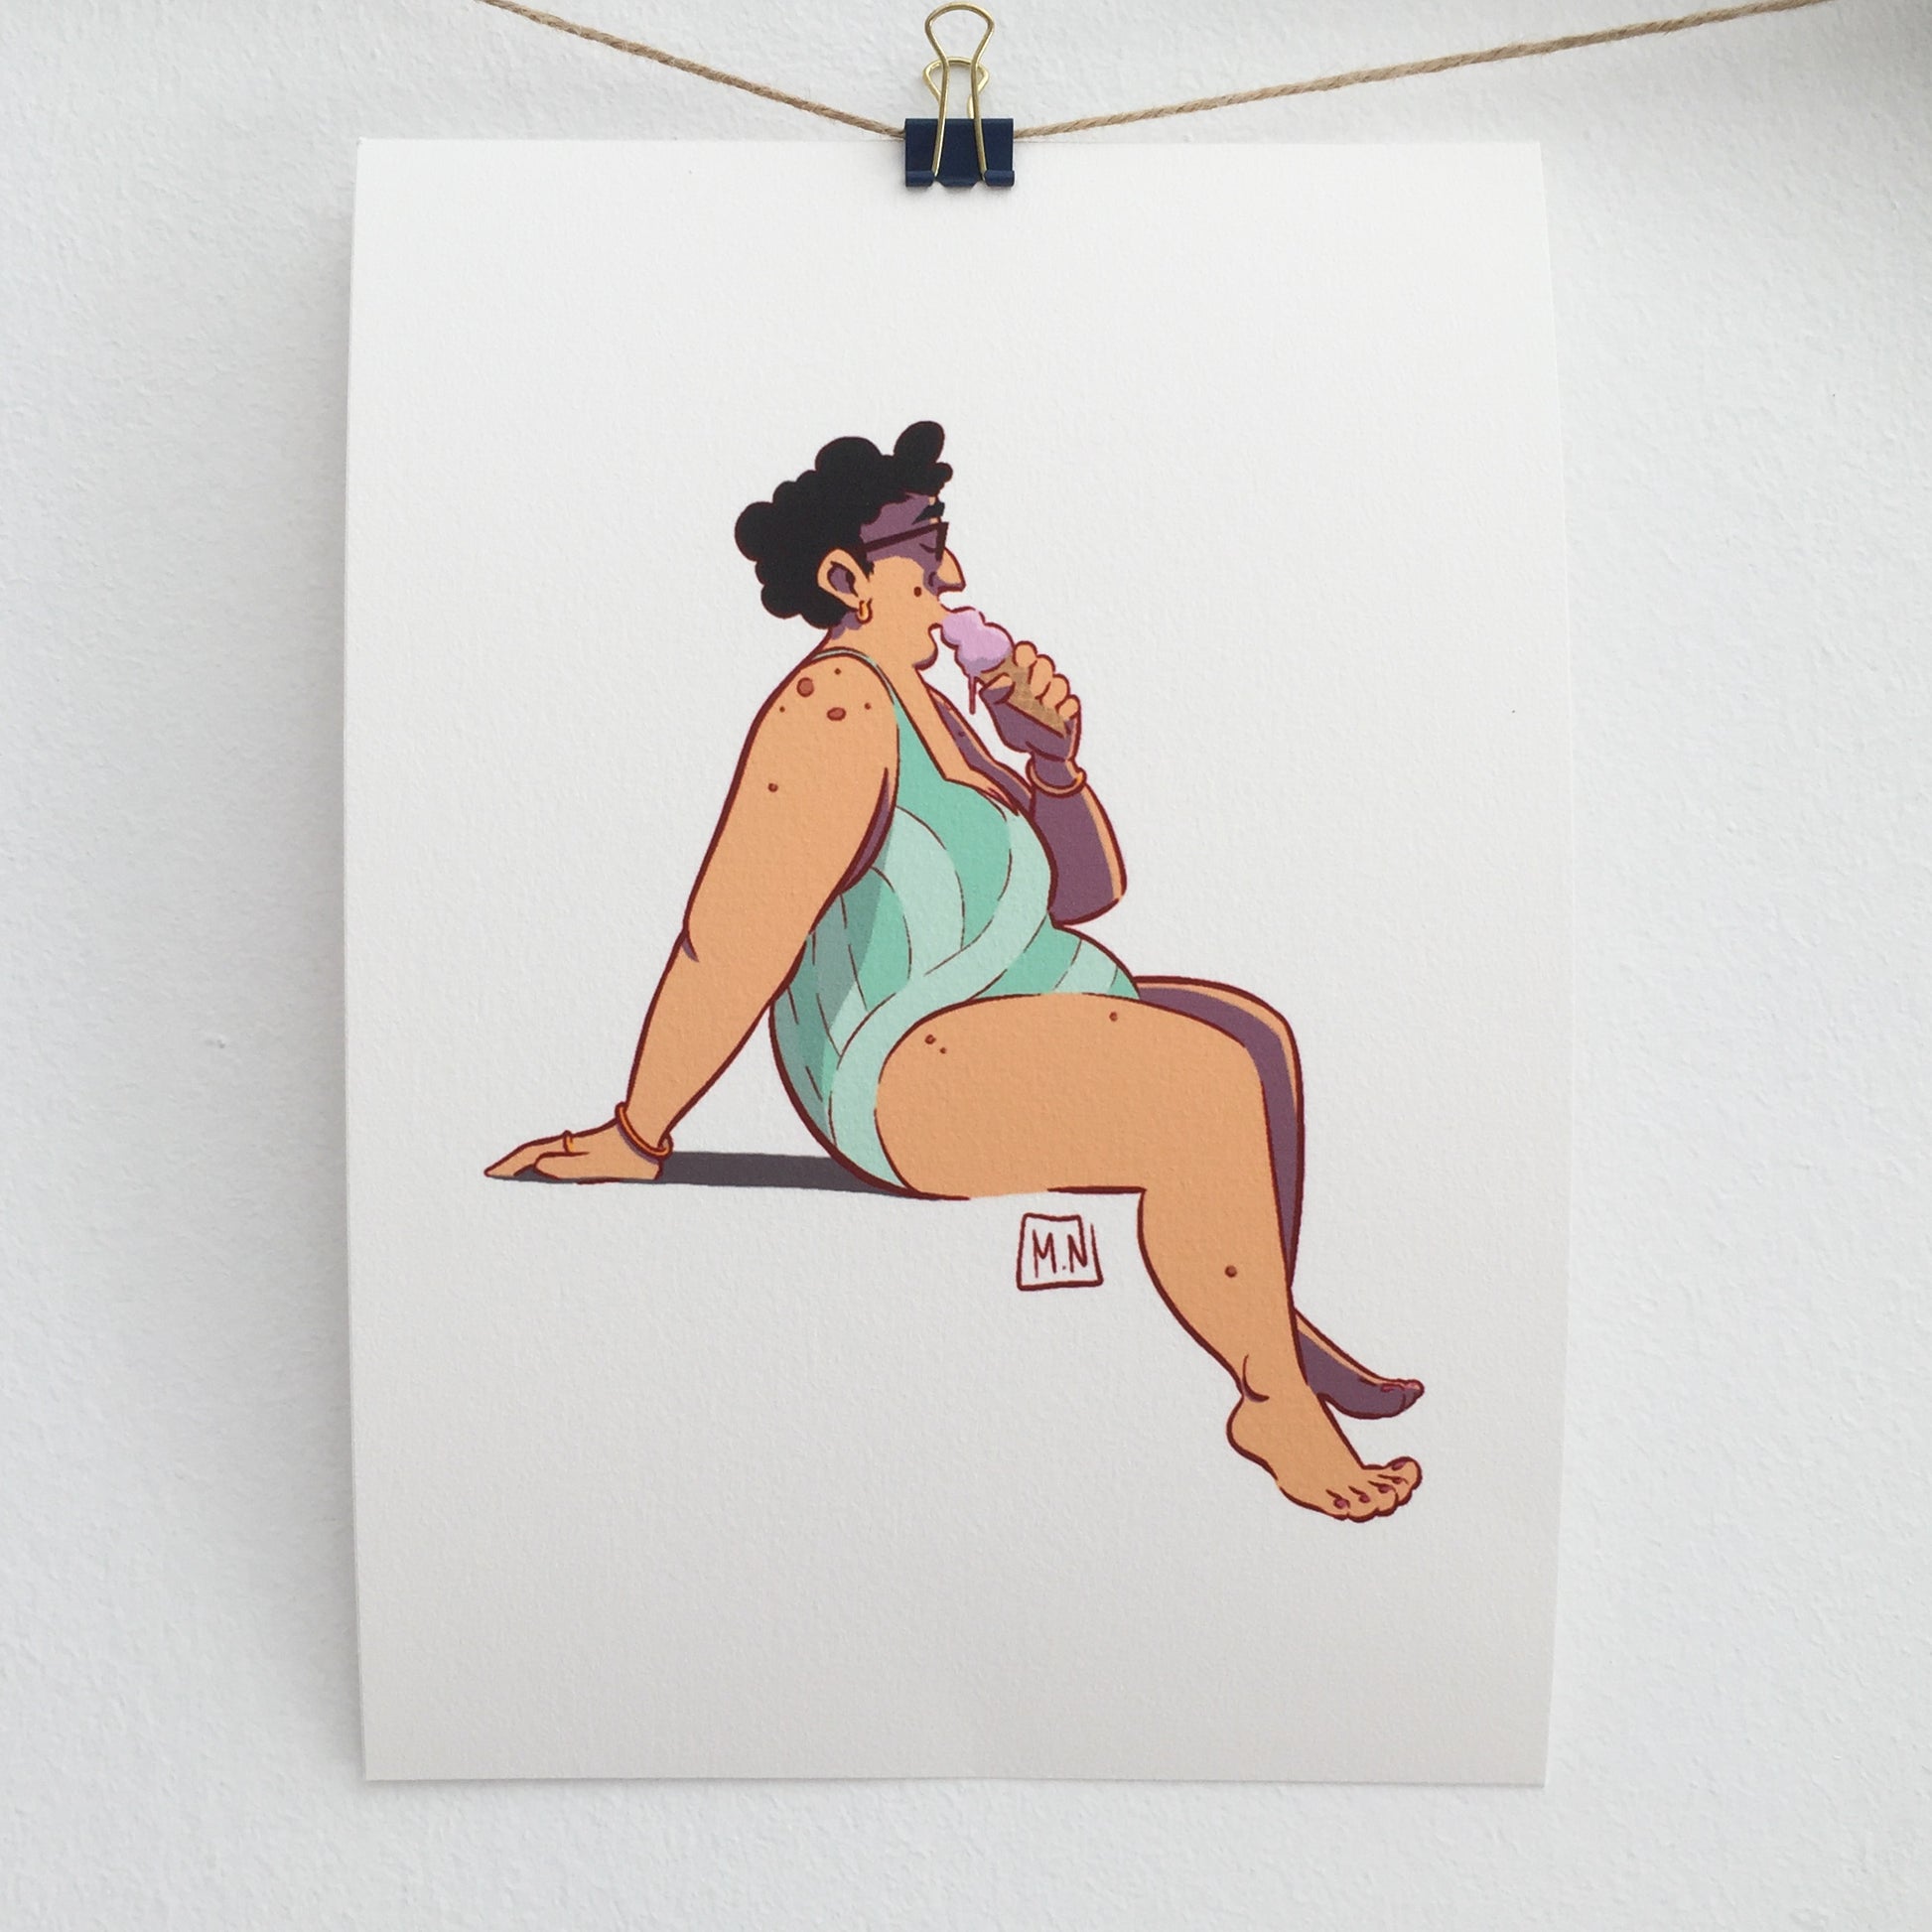 THe art print is hung on a wire with a drawing pliers.